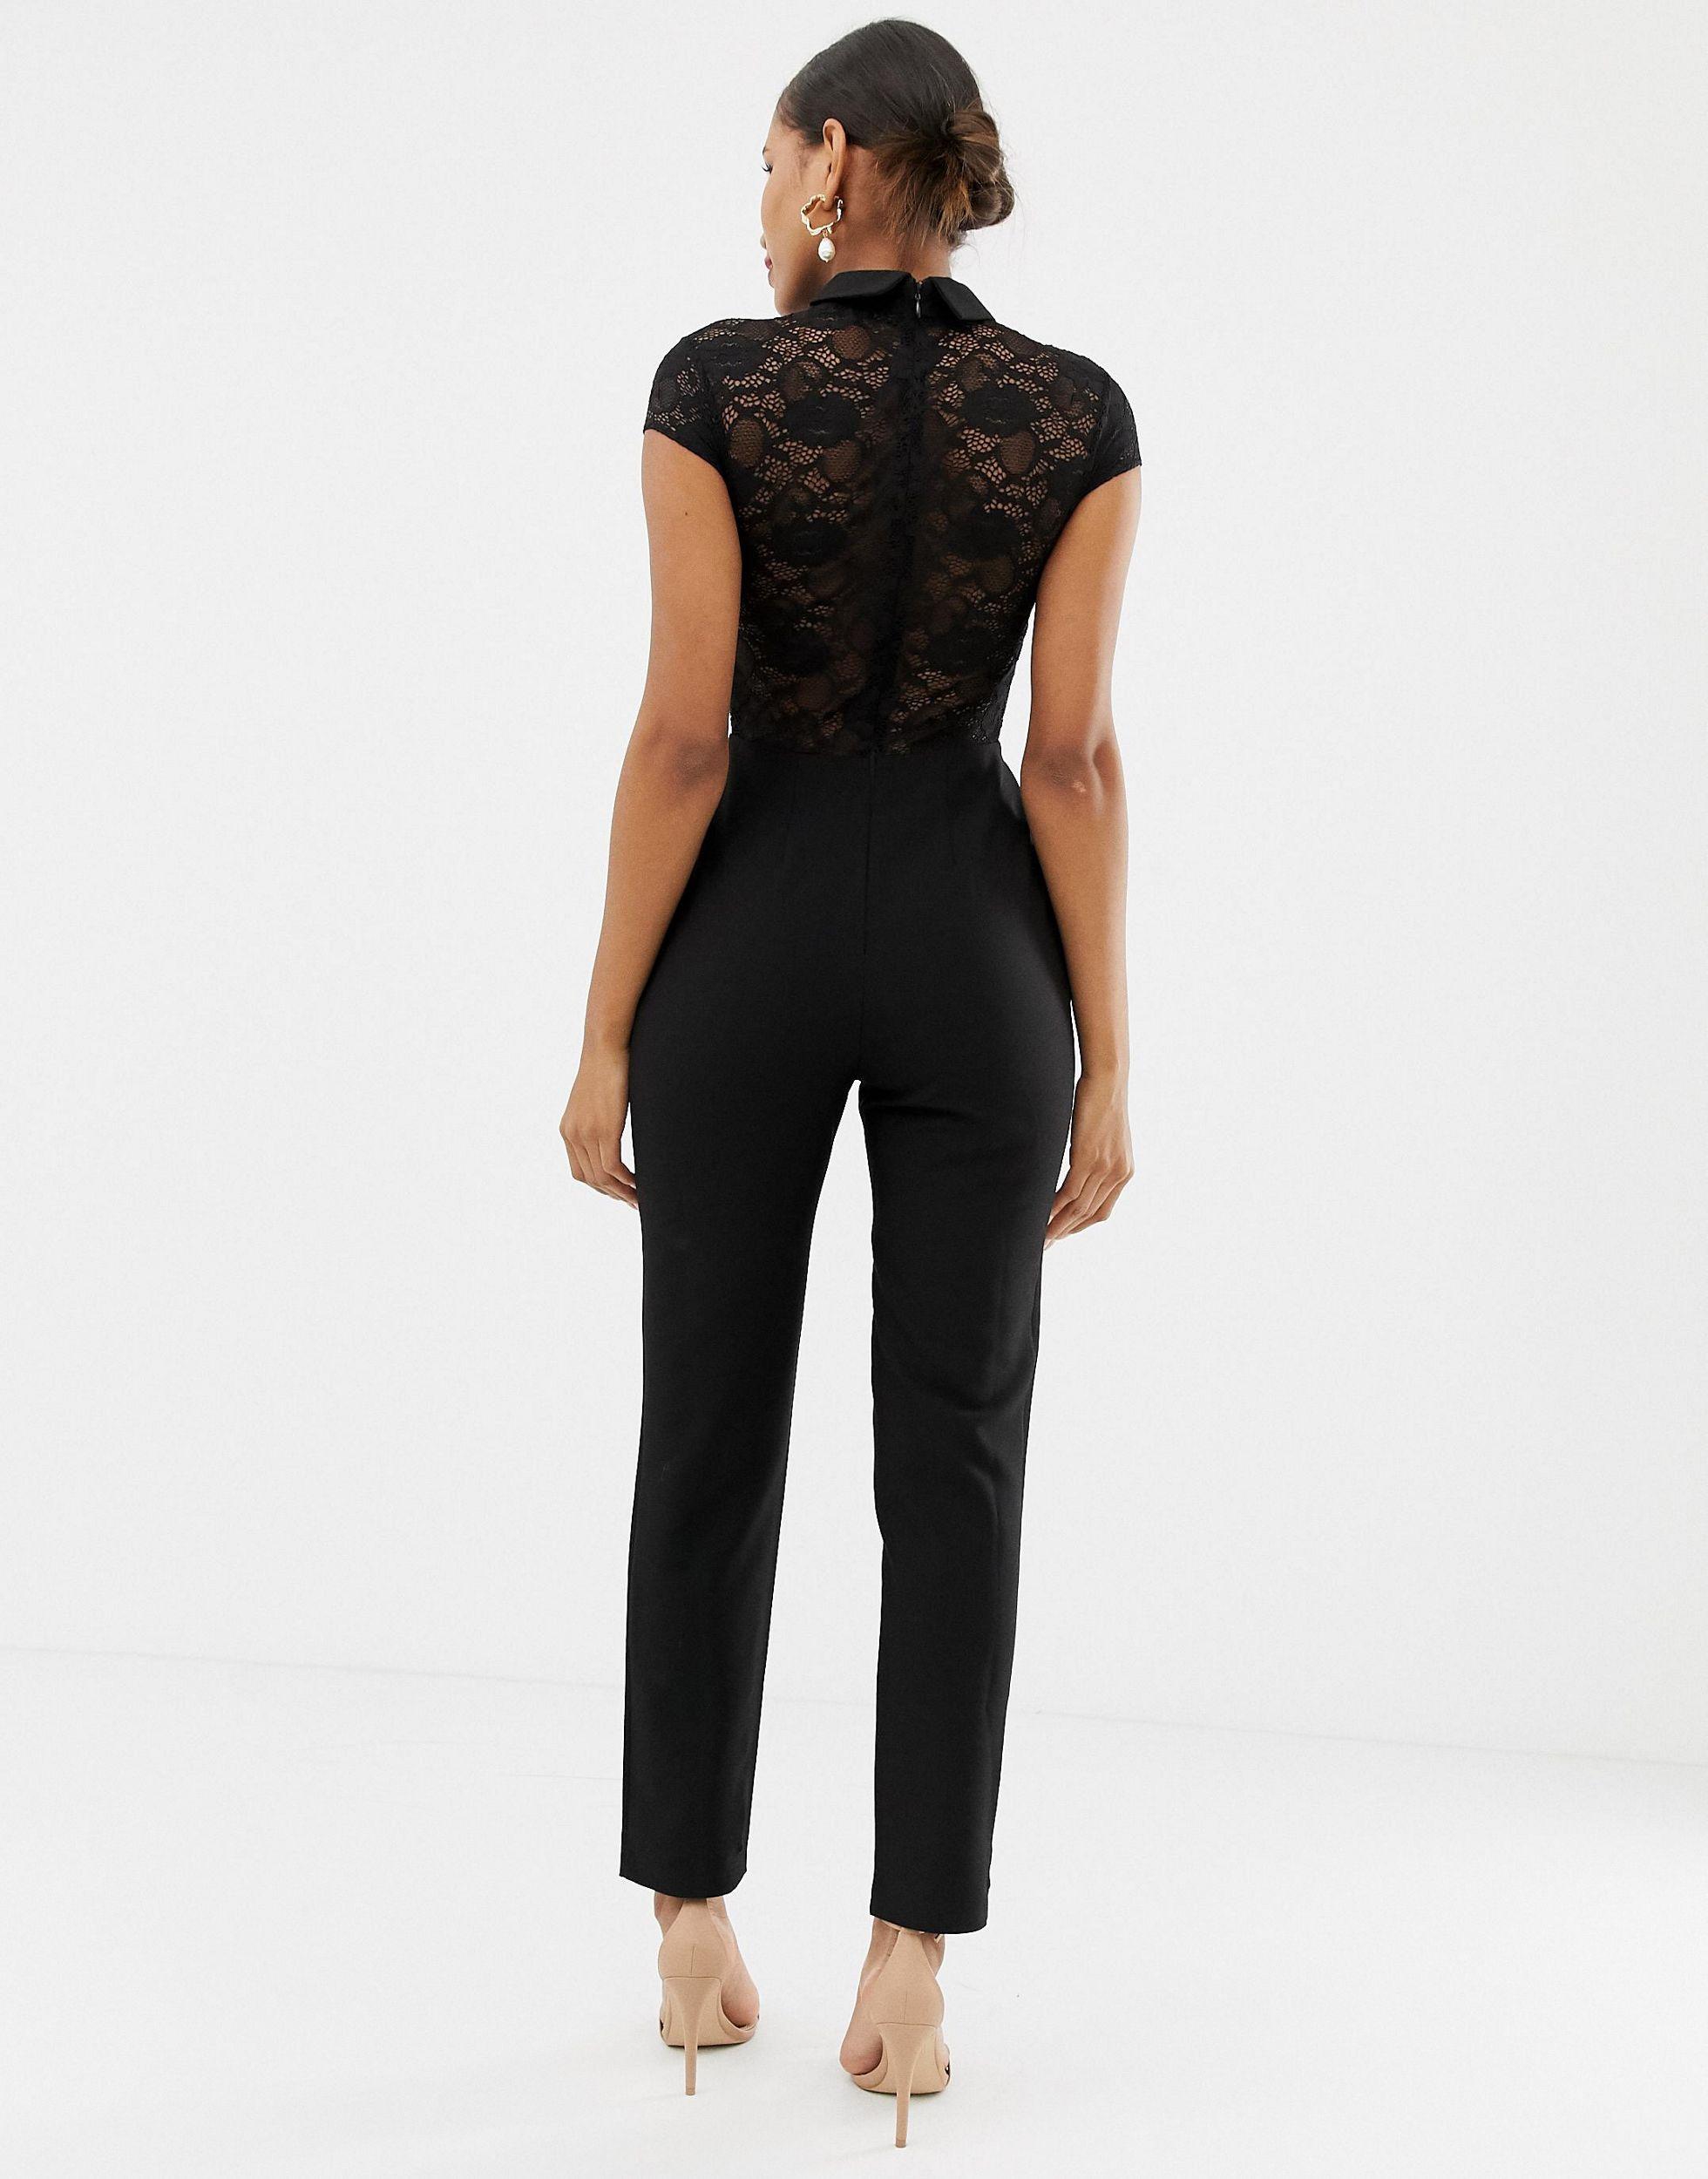 ASOS Lace Top Jumpsuit With Collar in Black | Lyst